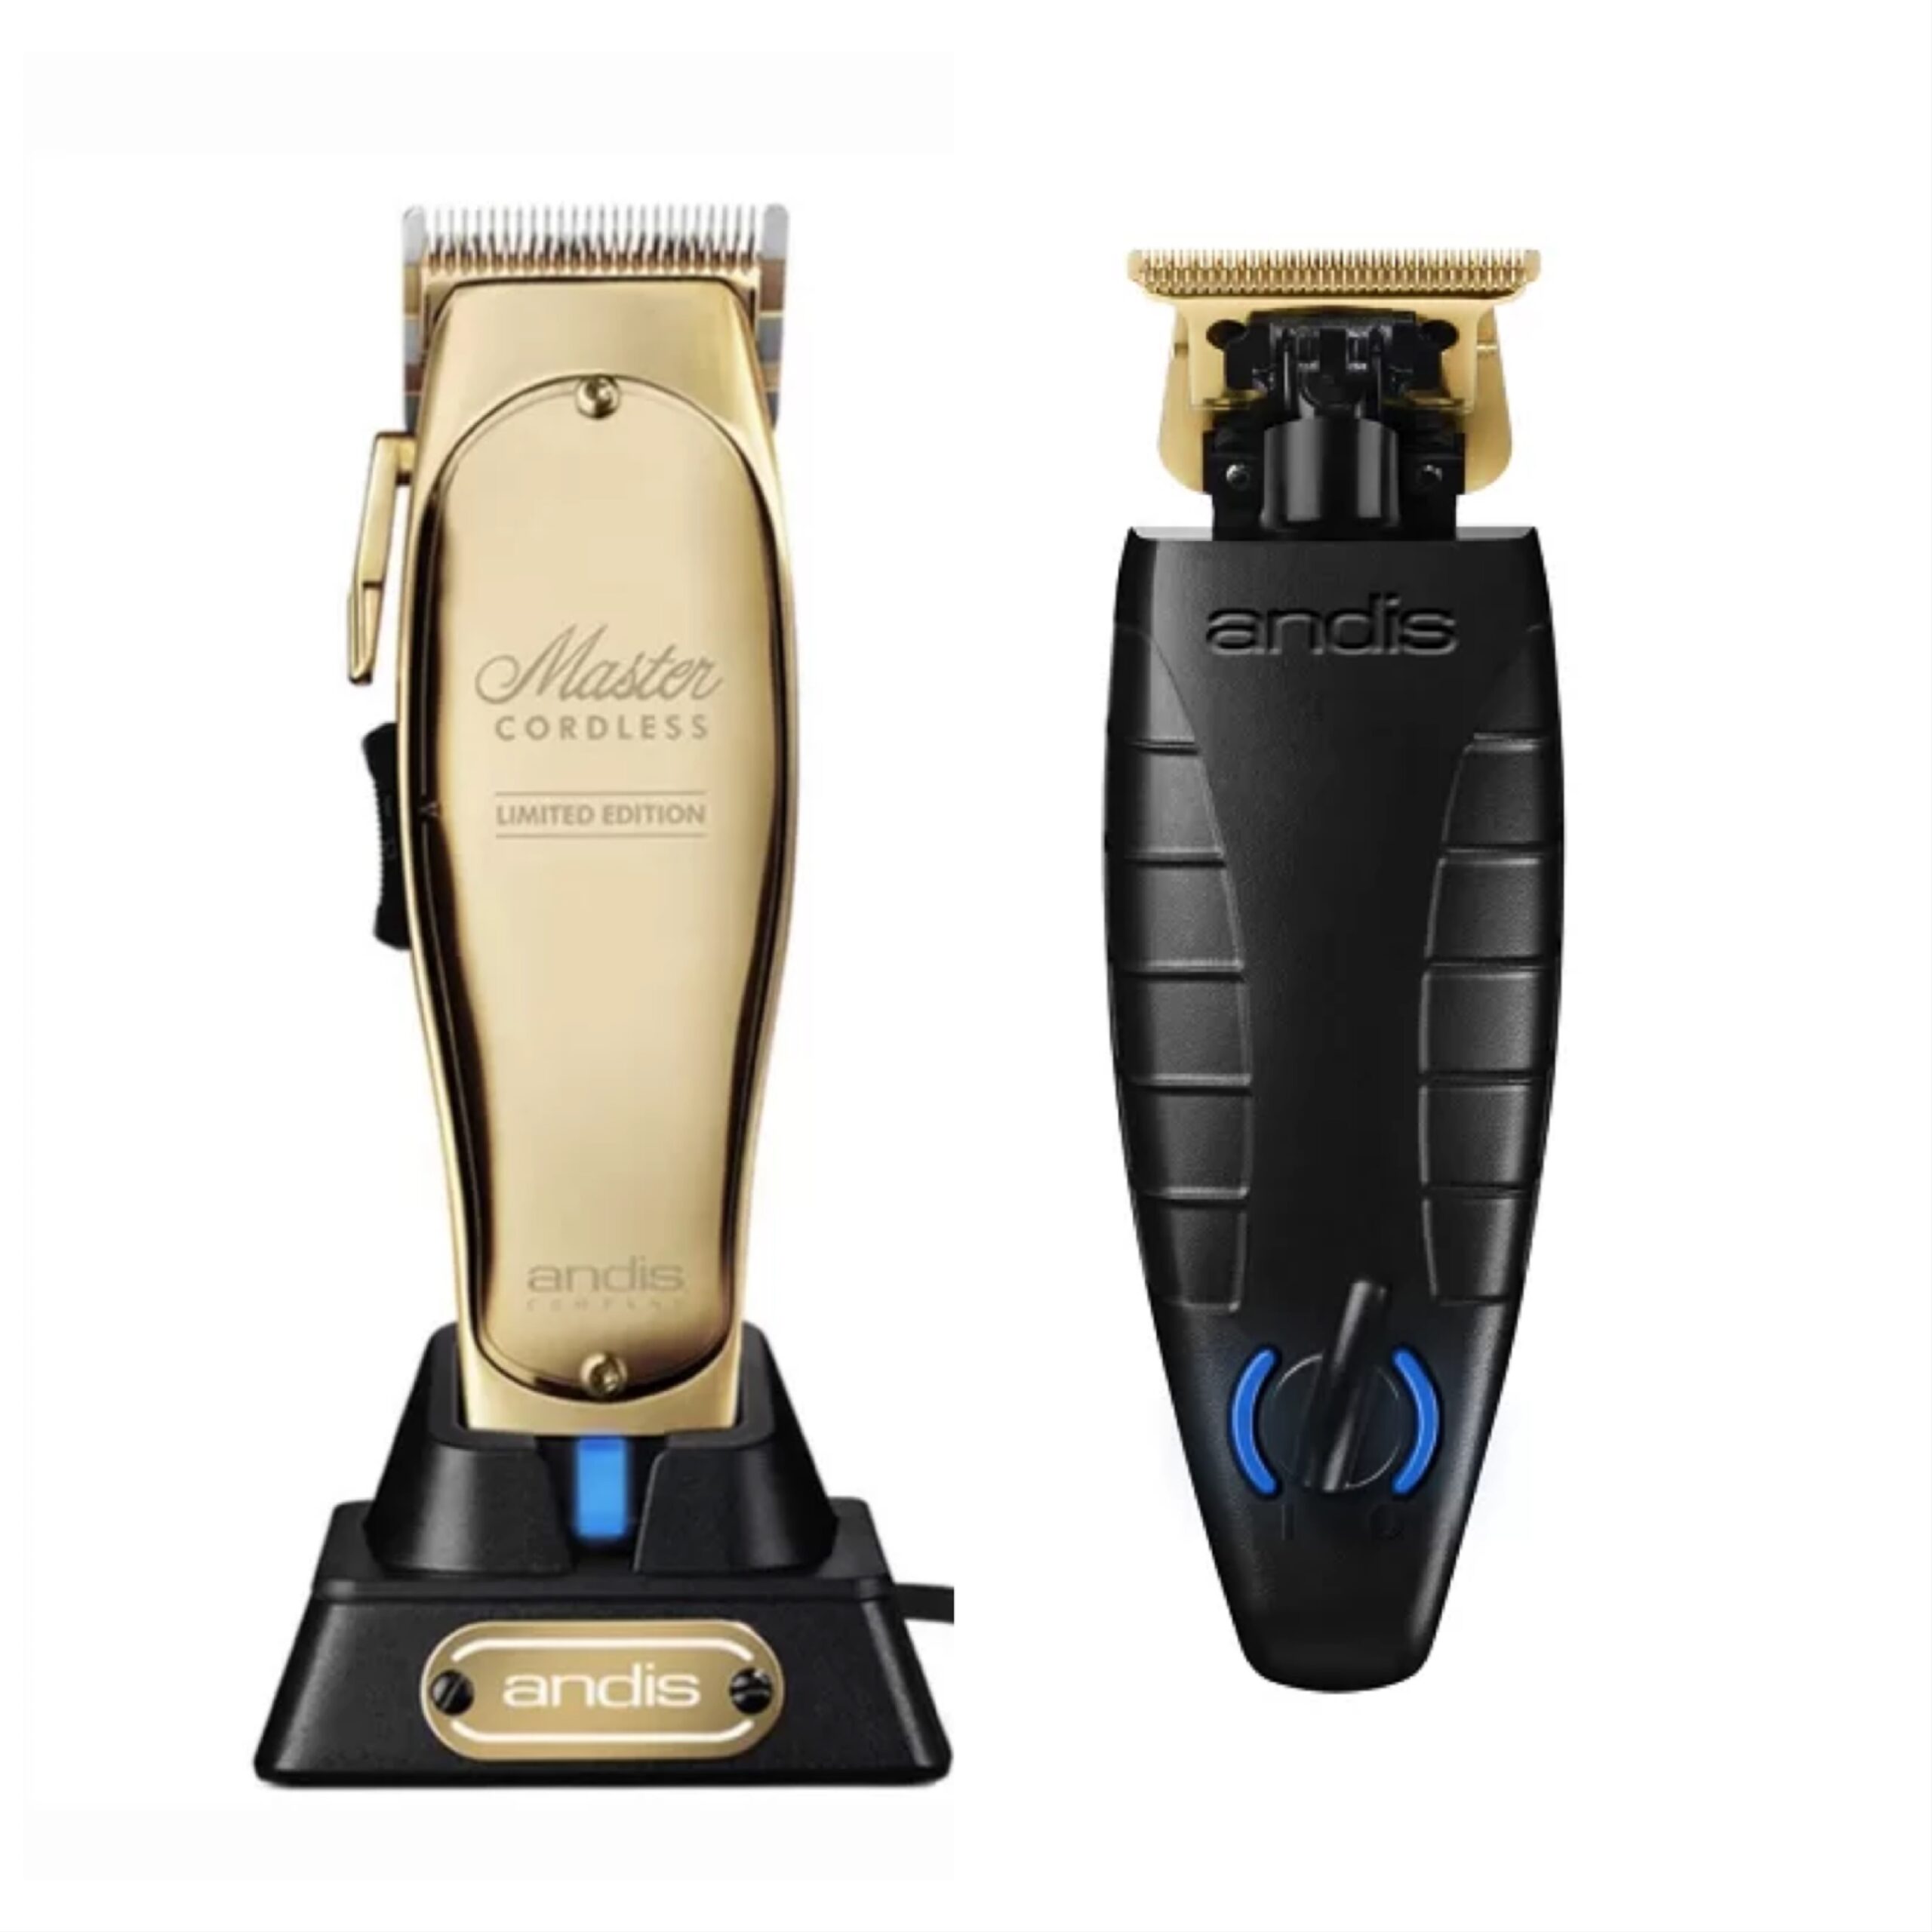 Andis 2pc Cordless Combo by ibs - Gold limited Cordless Master & Cordless GTX-EXO